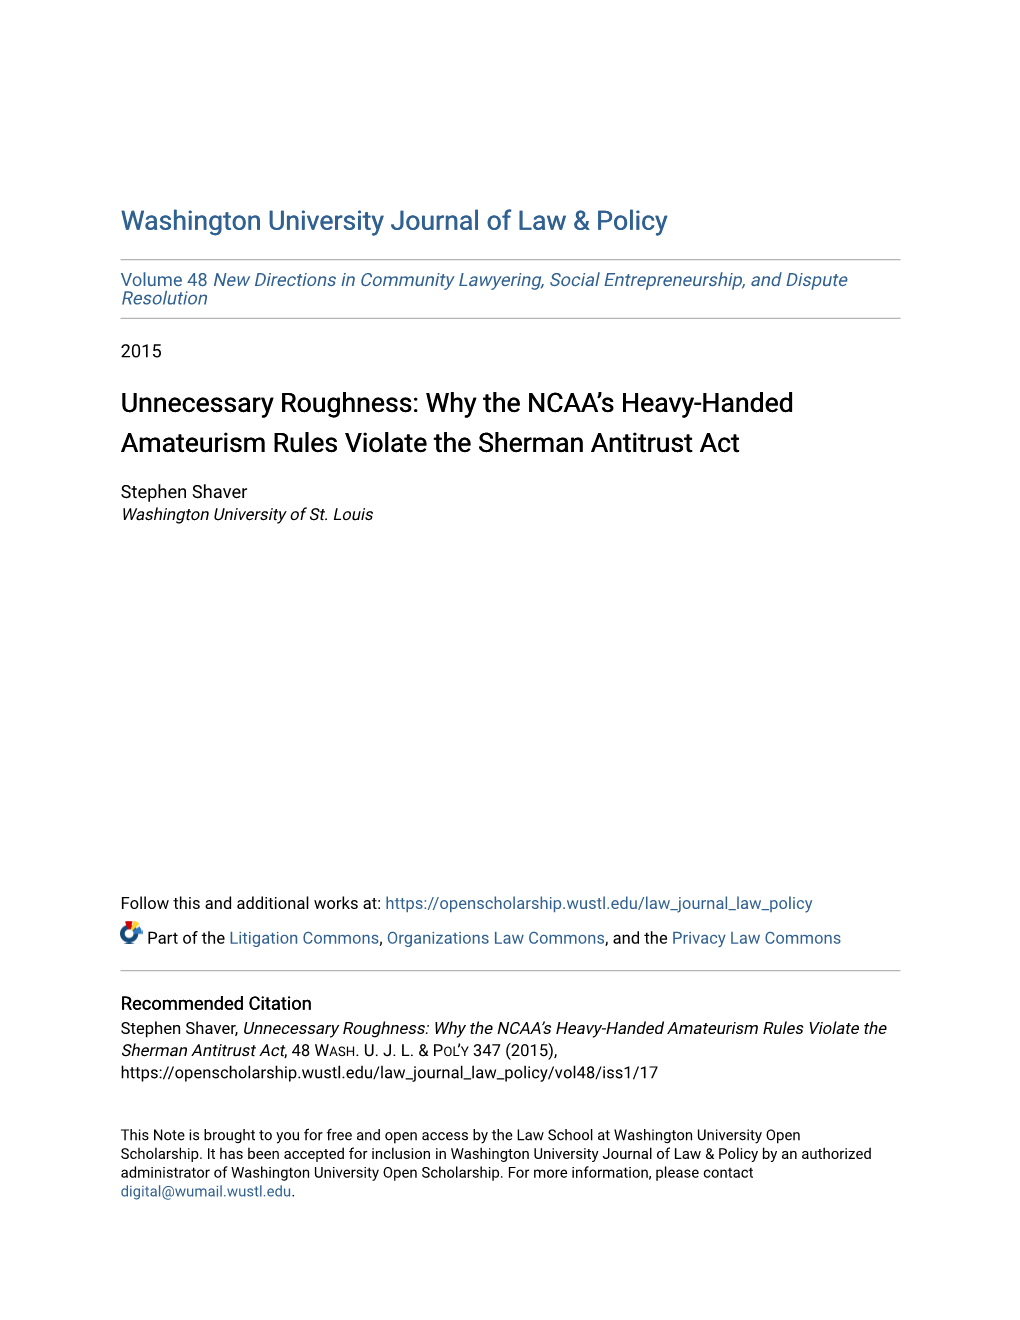 Unnecessary Roughness: Why the NCAA’S Heavy-Handed Amateurism Rules Violate the Sherman Antitrust Act